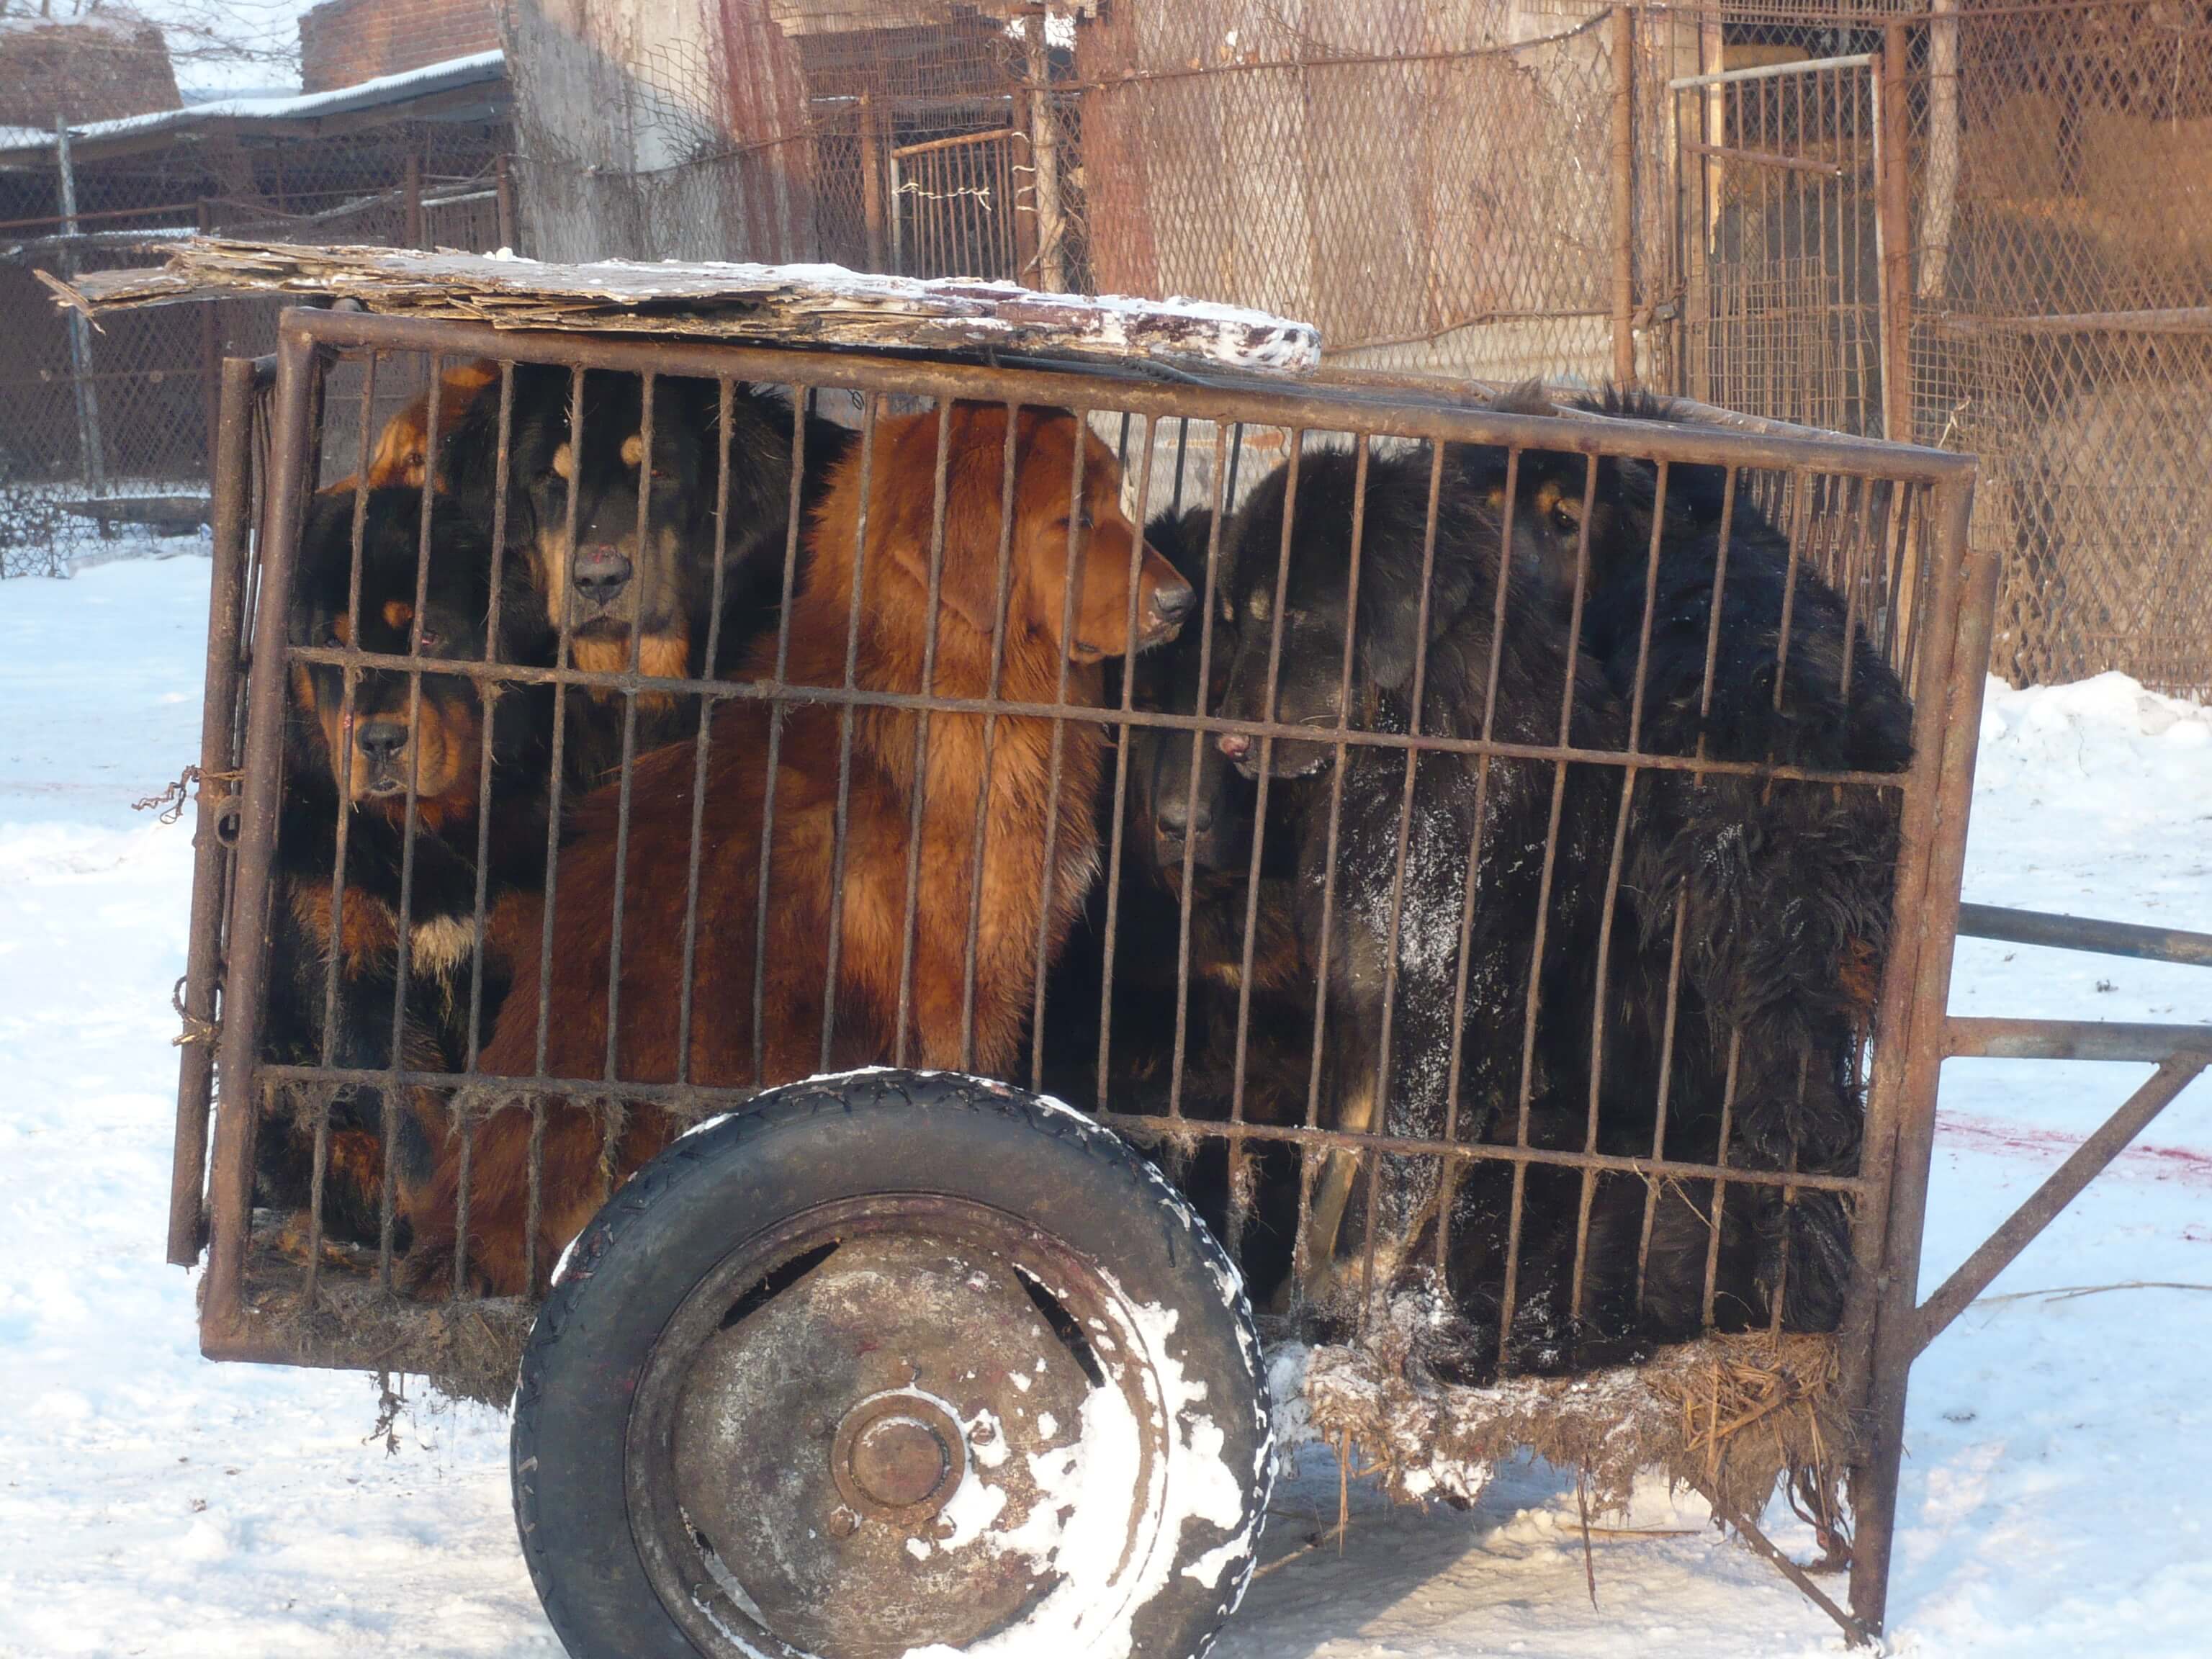 Dog slaughterhouse investigation December 2012. Dogs crammed in small cage.